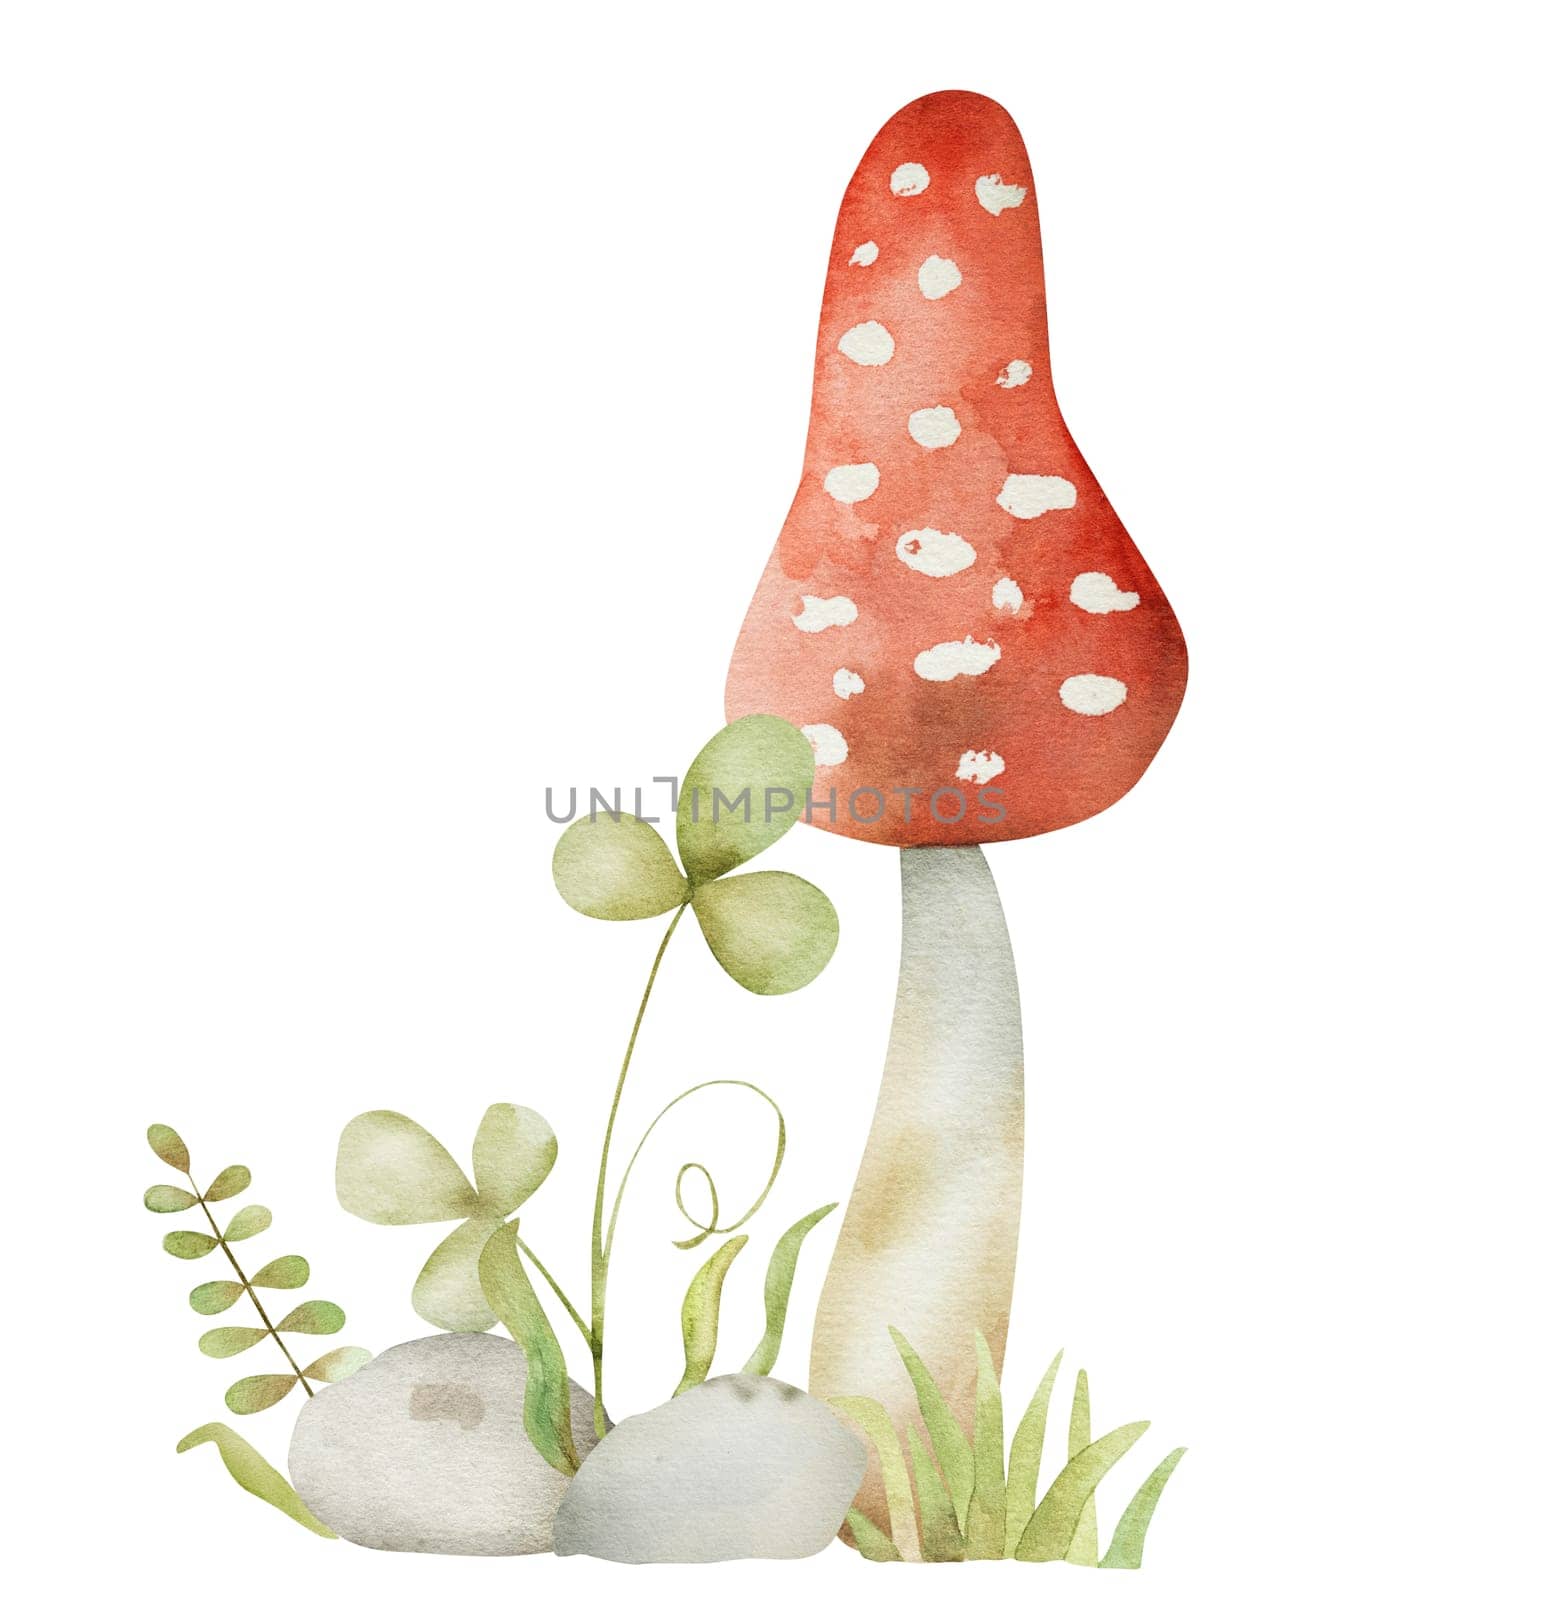 Forest red mushroom and green clover fairytale watercolor painting. Cartoon fly agaric amanita aquarelle drawing